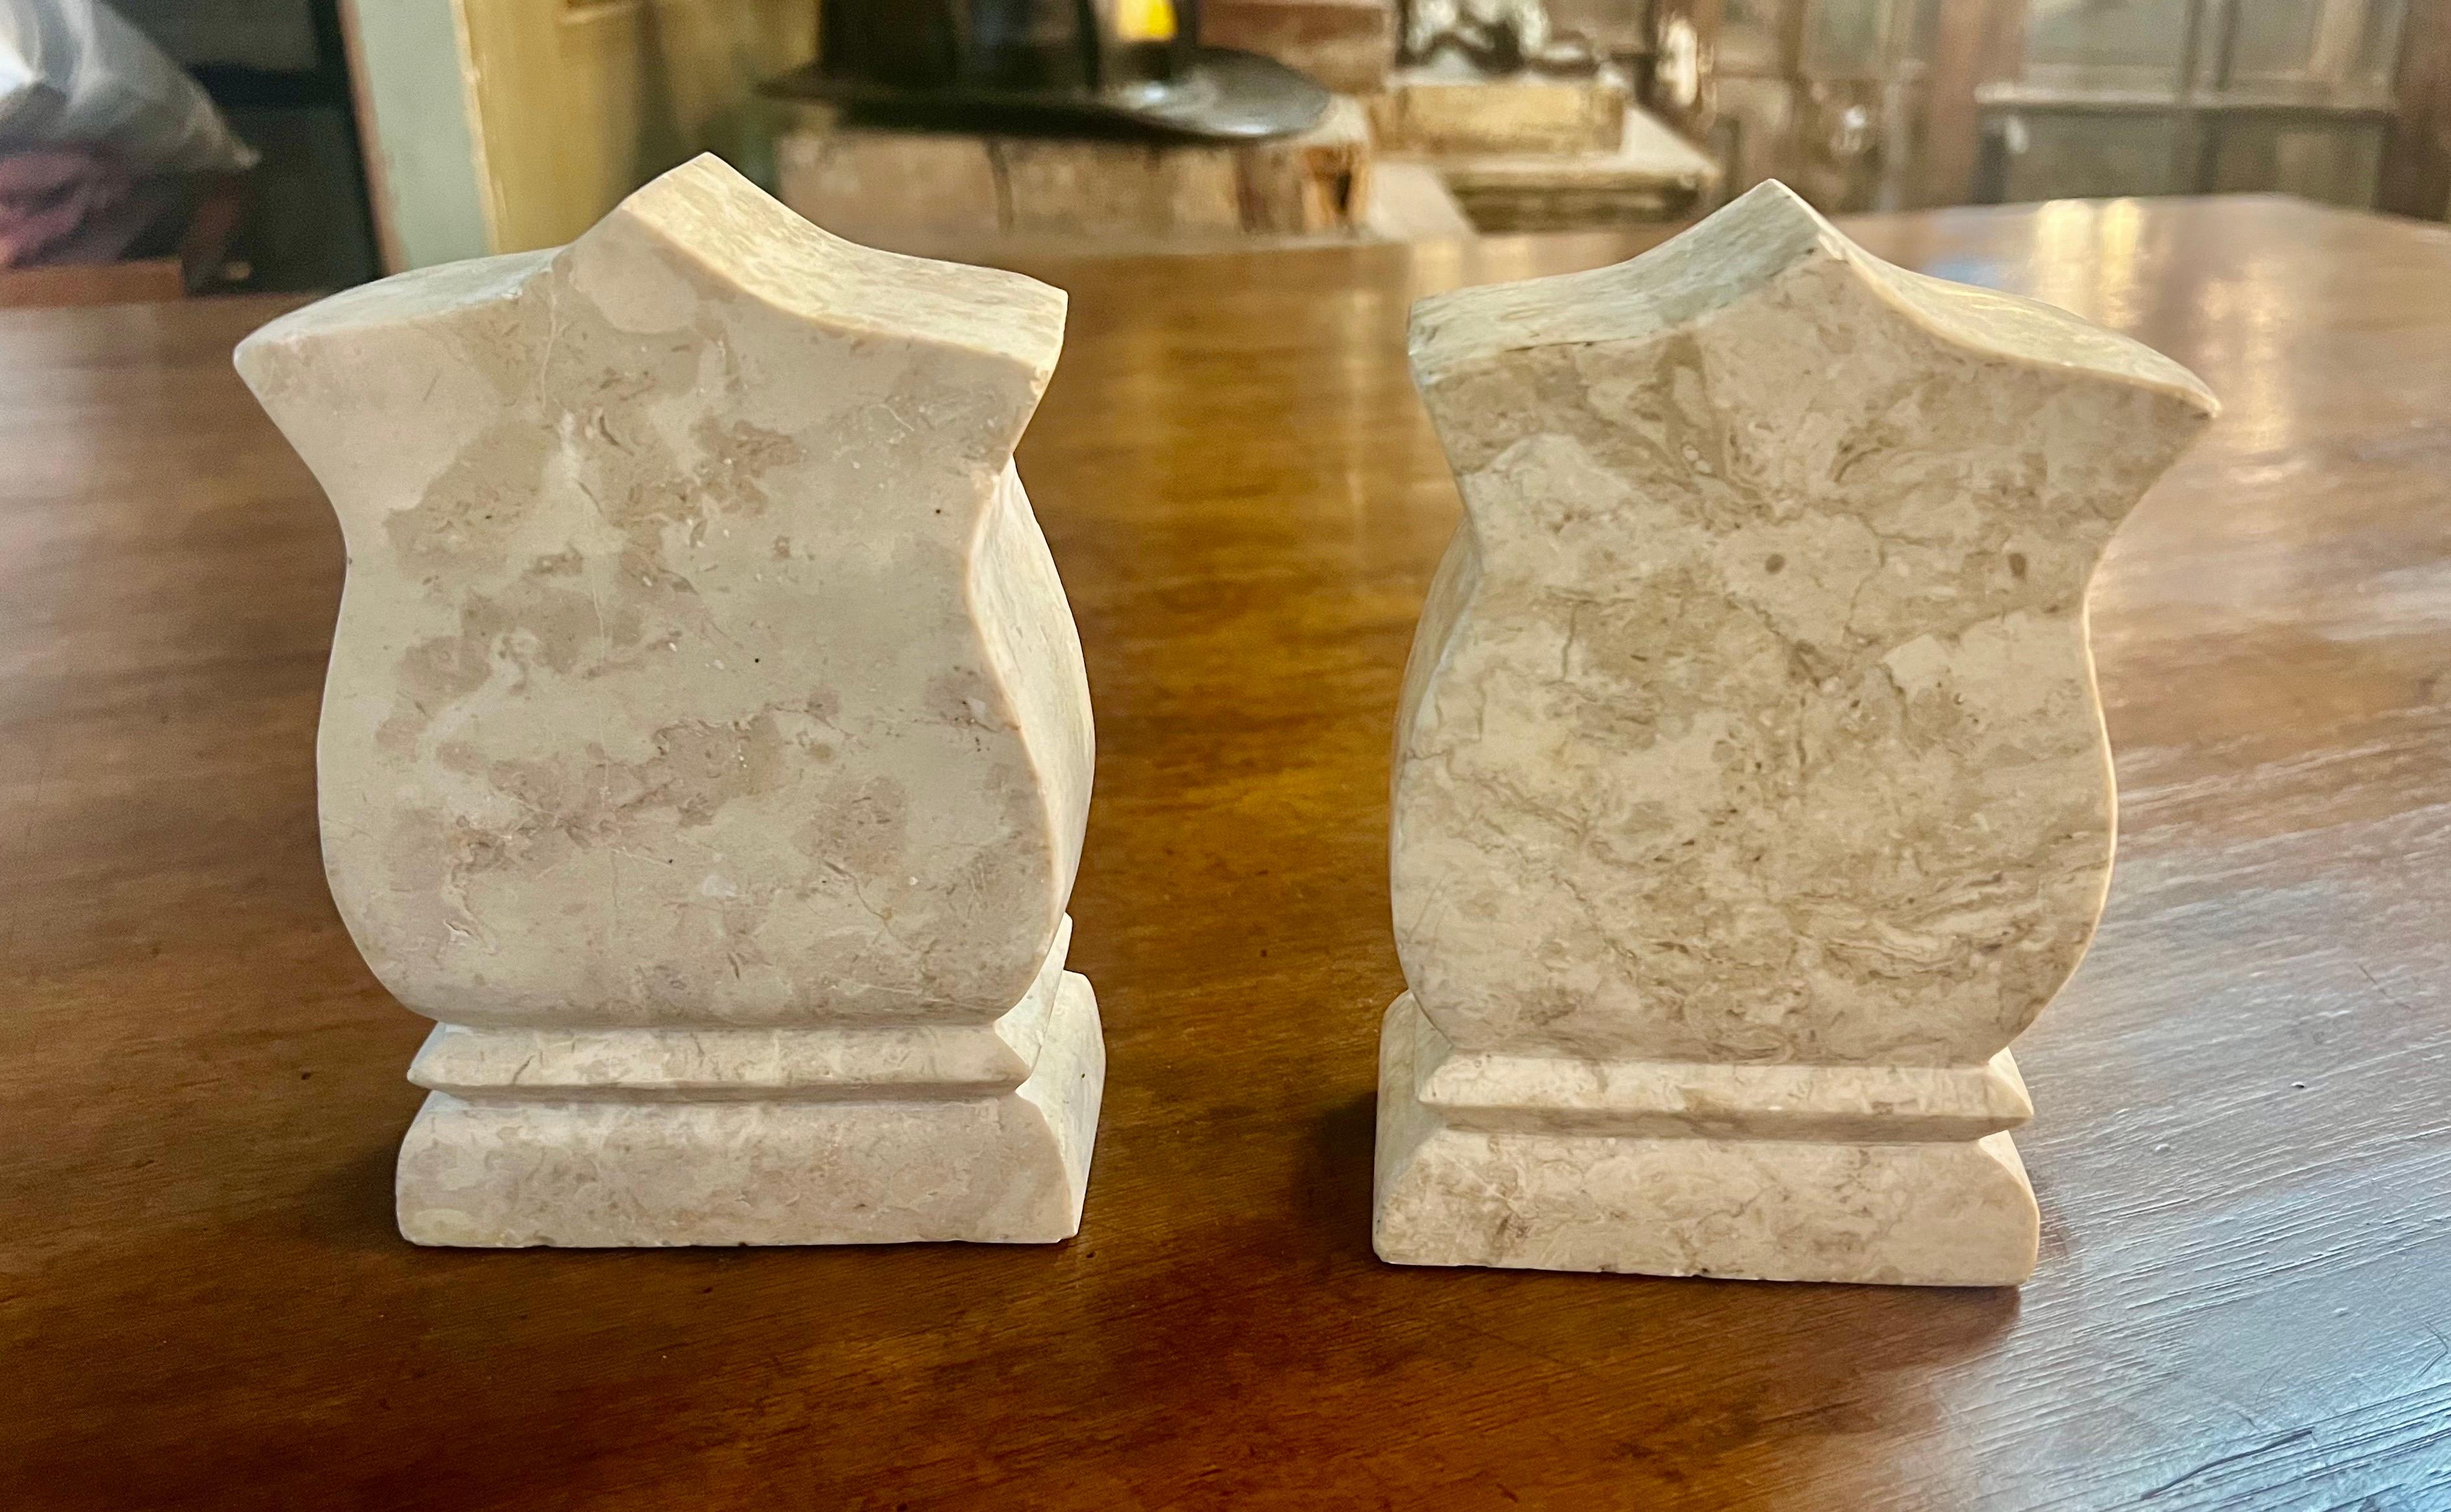 A pair of mid-20th century Italian travertine bookends carved in creams and beige coloration.  They are a classic and elegant addition to any bookshelf of decor.